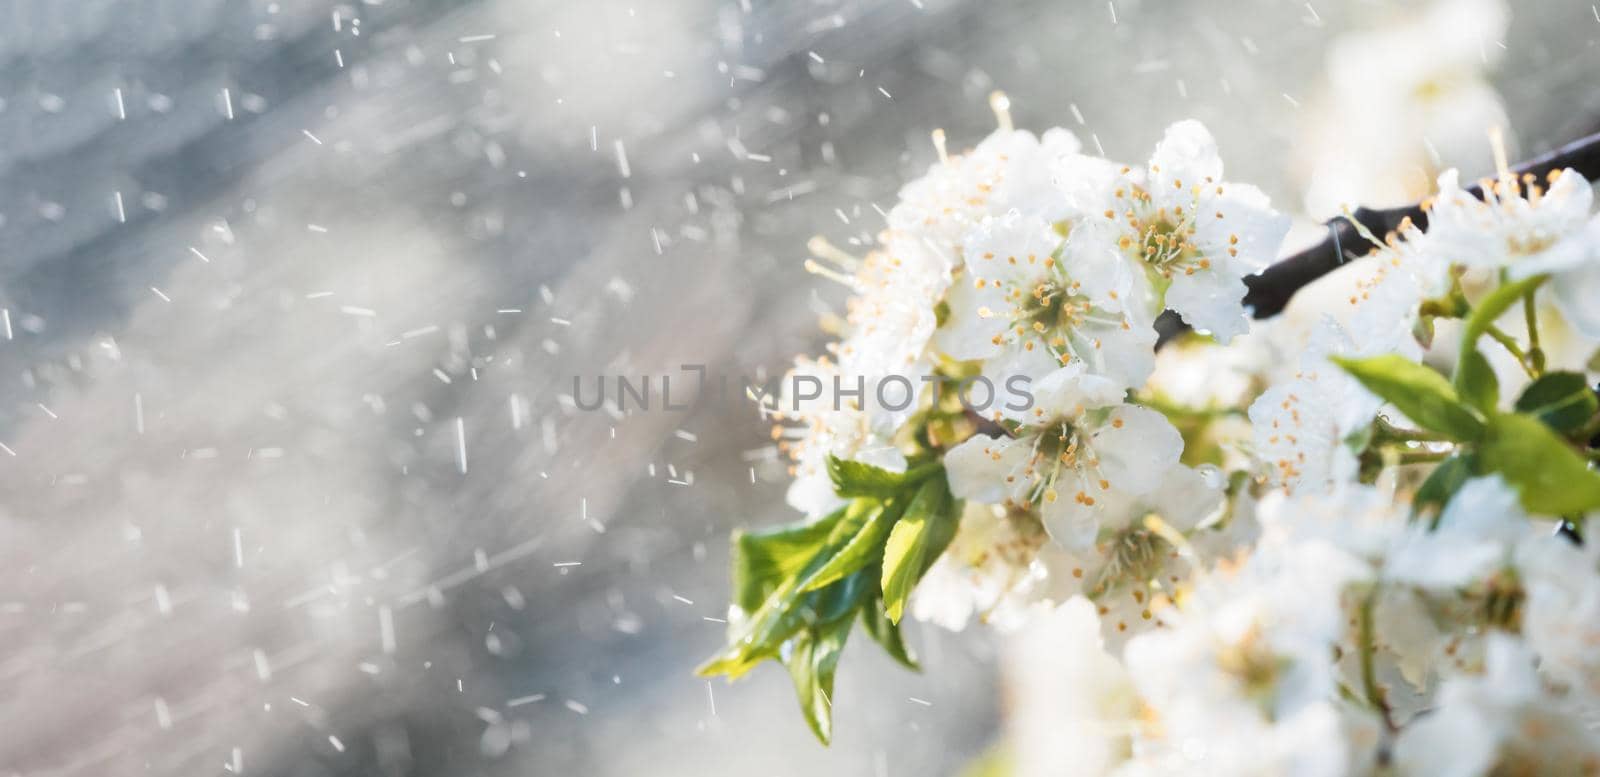 Spring rain in the garden. White flowers of cherry plum in the rain on a spring day. Soft focus and shallow DOF